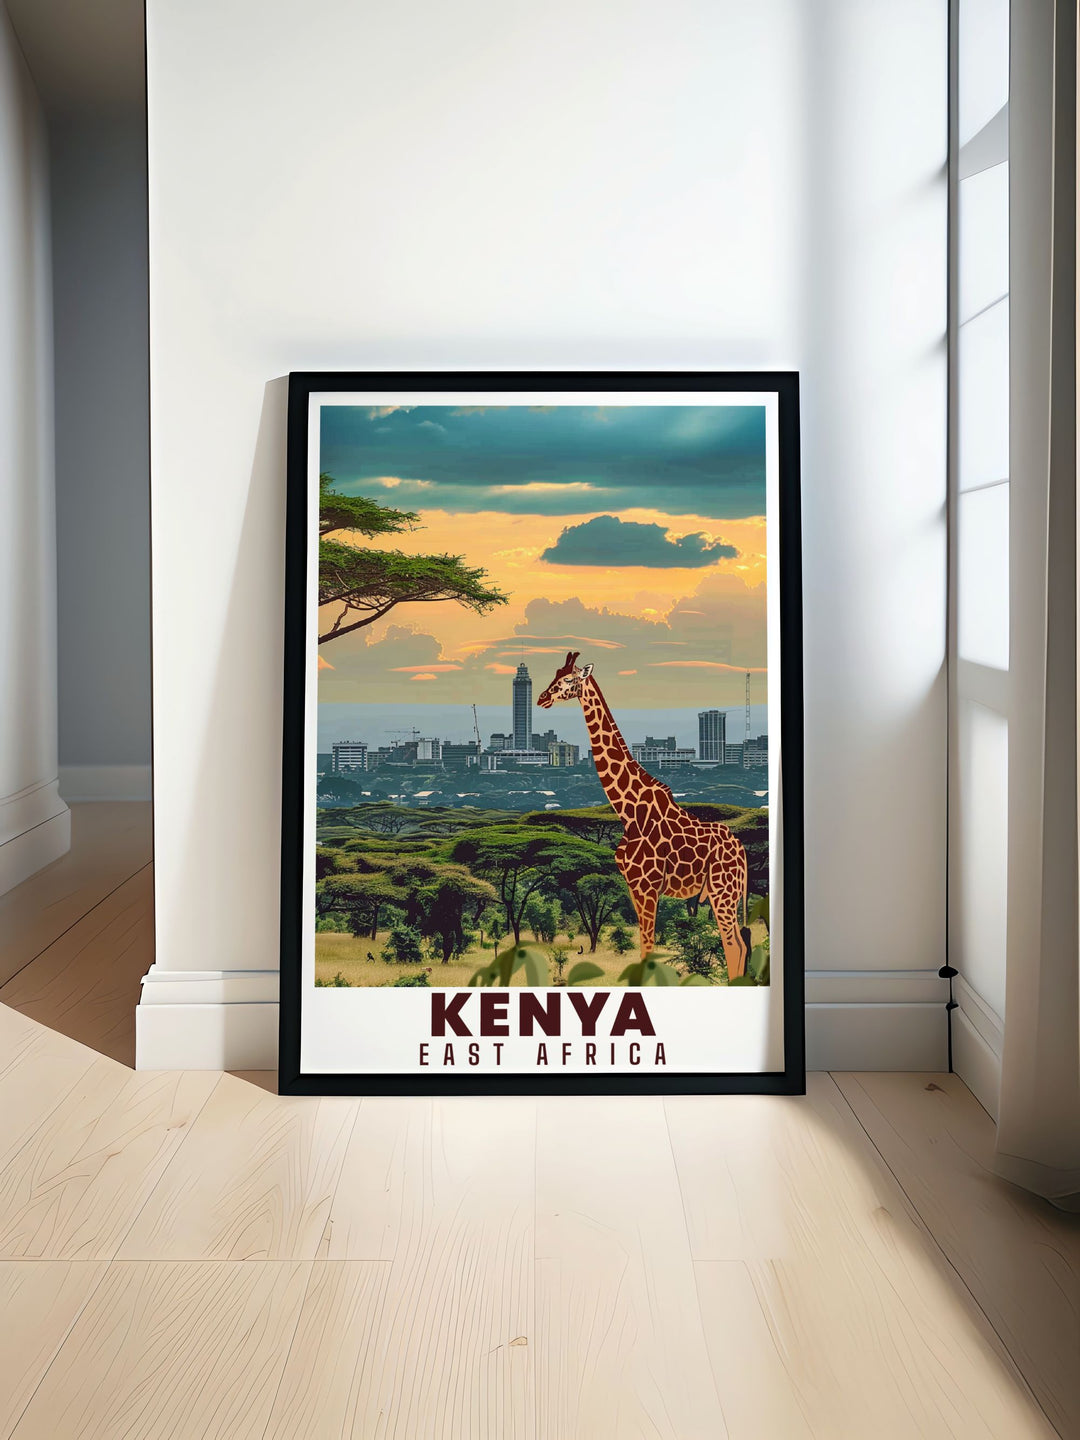 Explore the charm of Ann Arbor Art and Nairobi National Park Modern Prints featuring vibrant cityscapes and stunning wildlife scenes perfect for adding elegance to any home decor